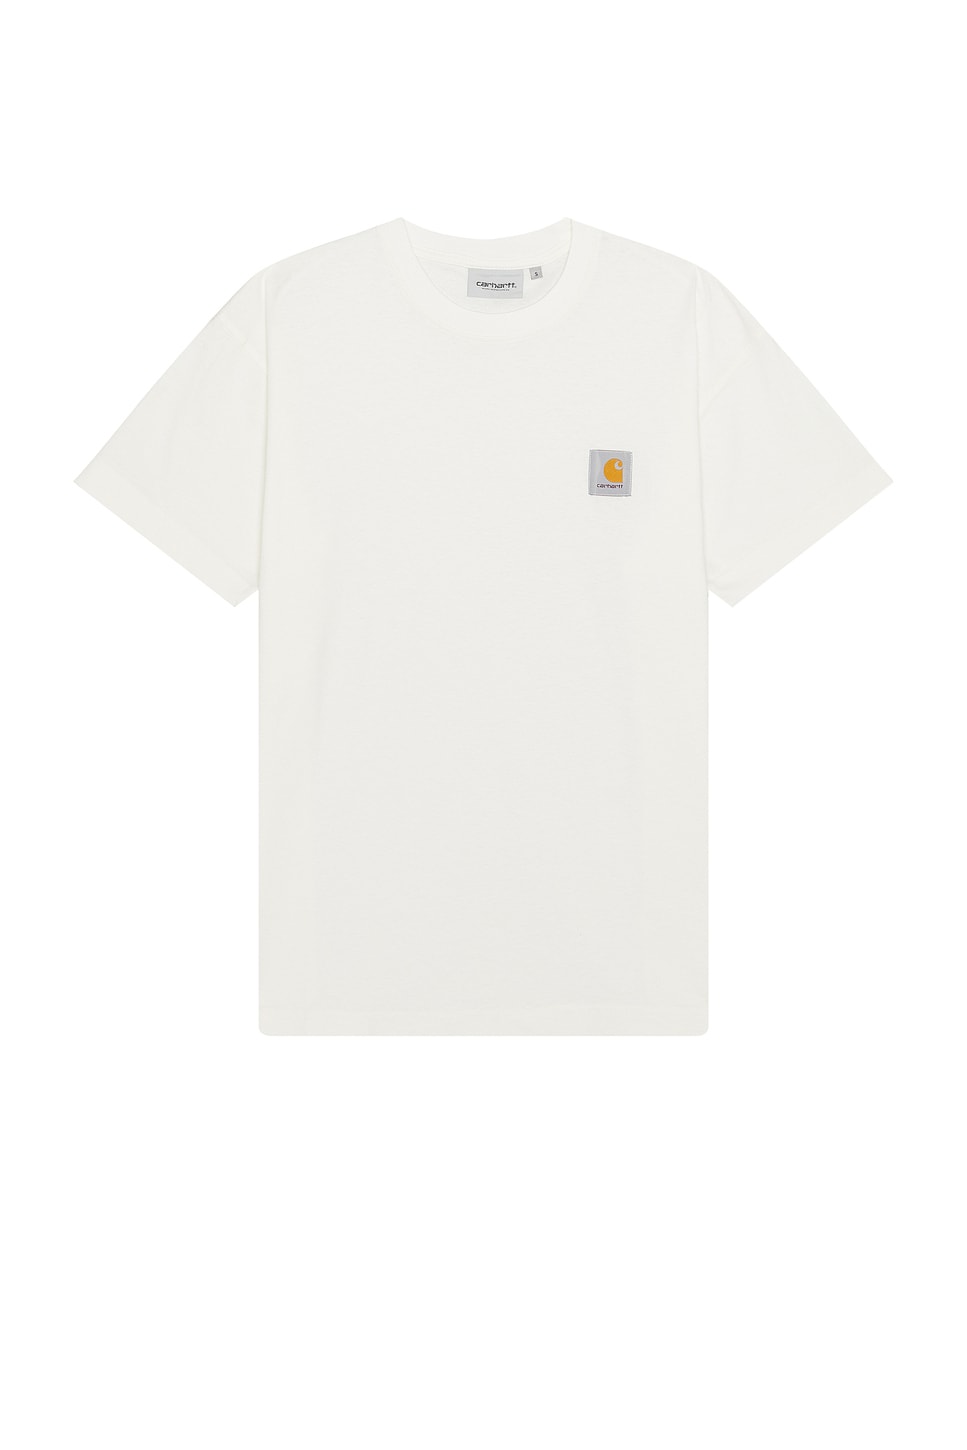 Image 1 of Carhartt WIP Short Sleeve Nelson T-shirt in Wax Garment Dyed